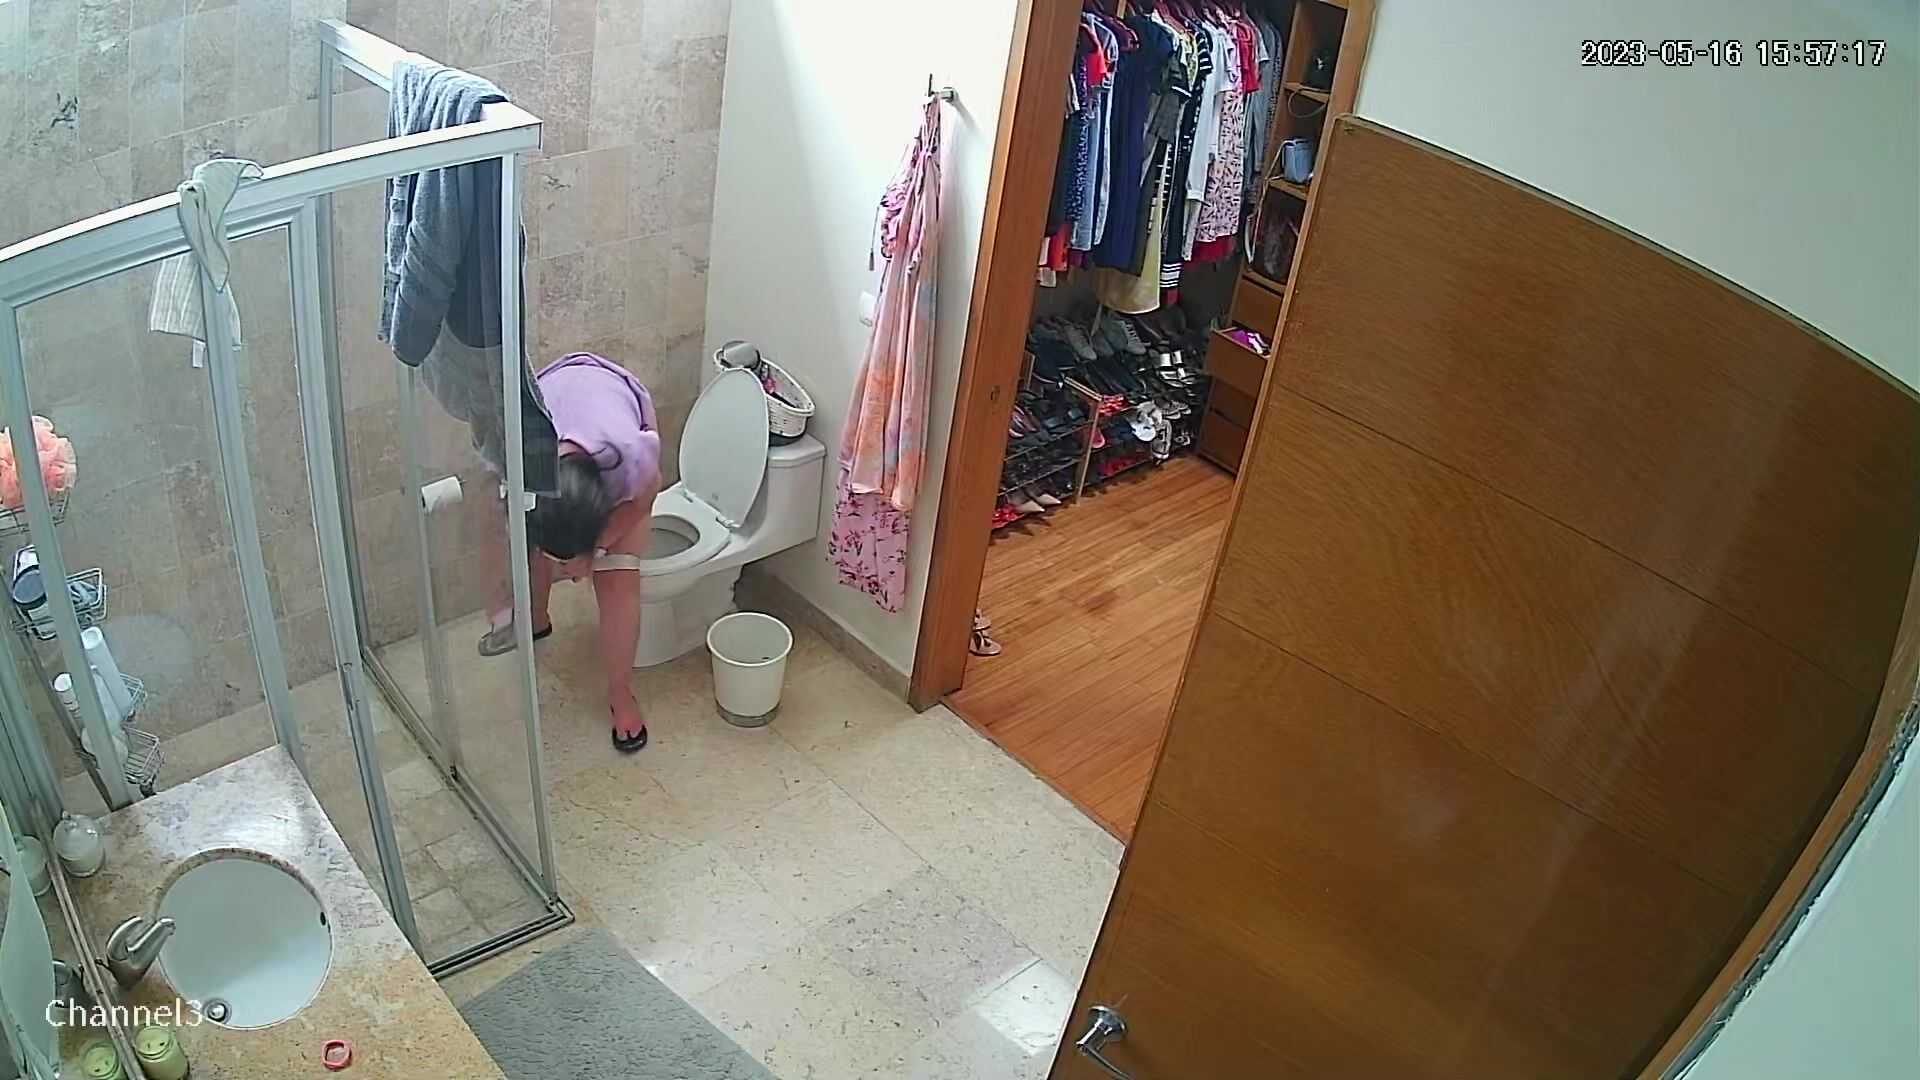 Woman pissing herself porn